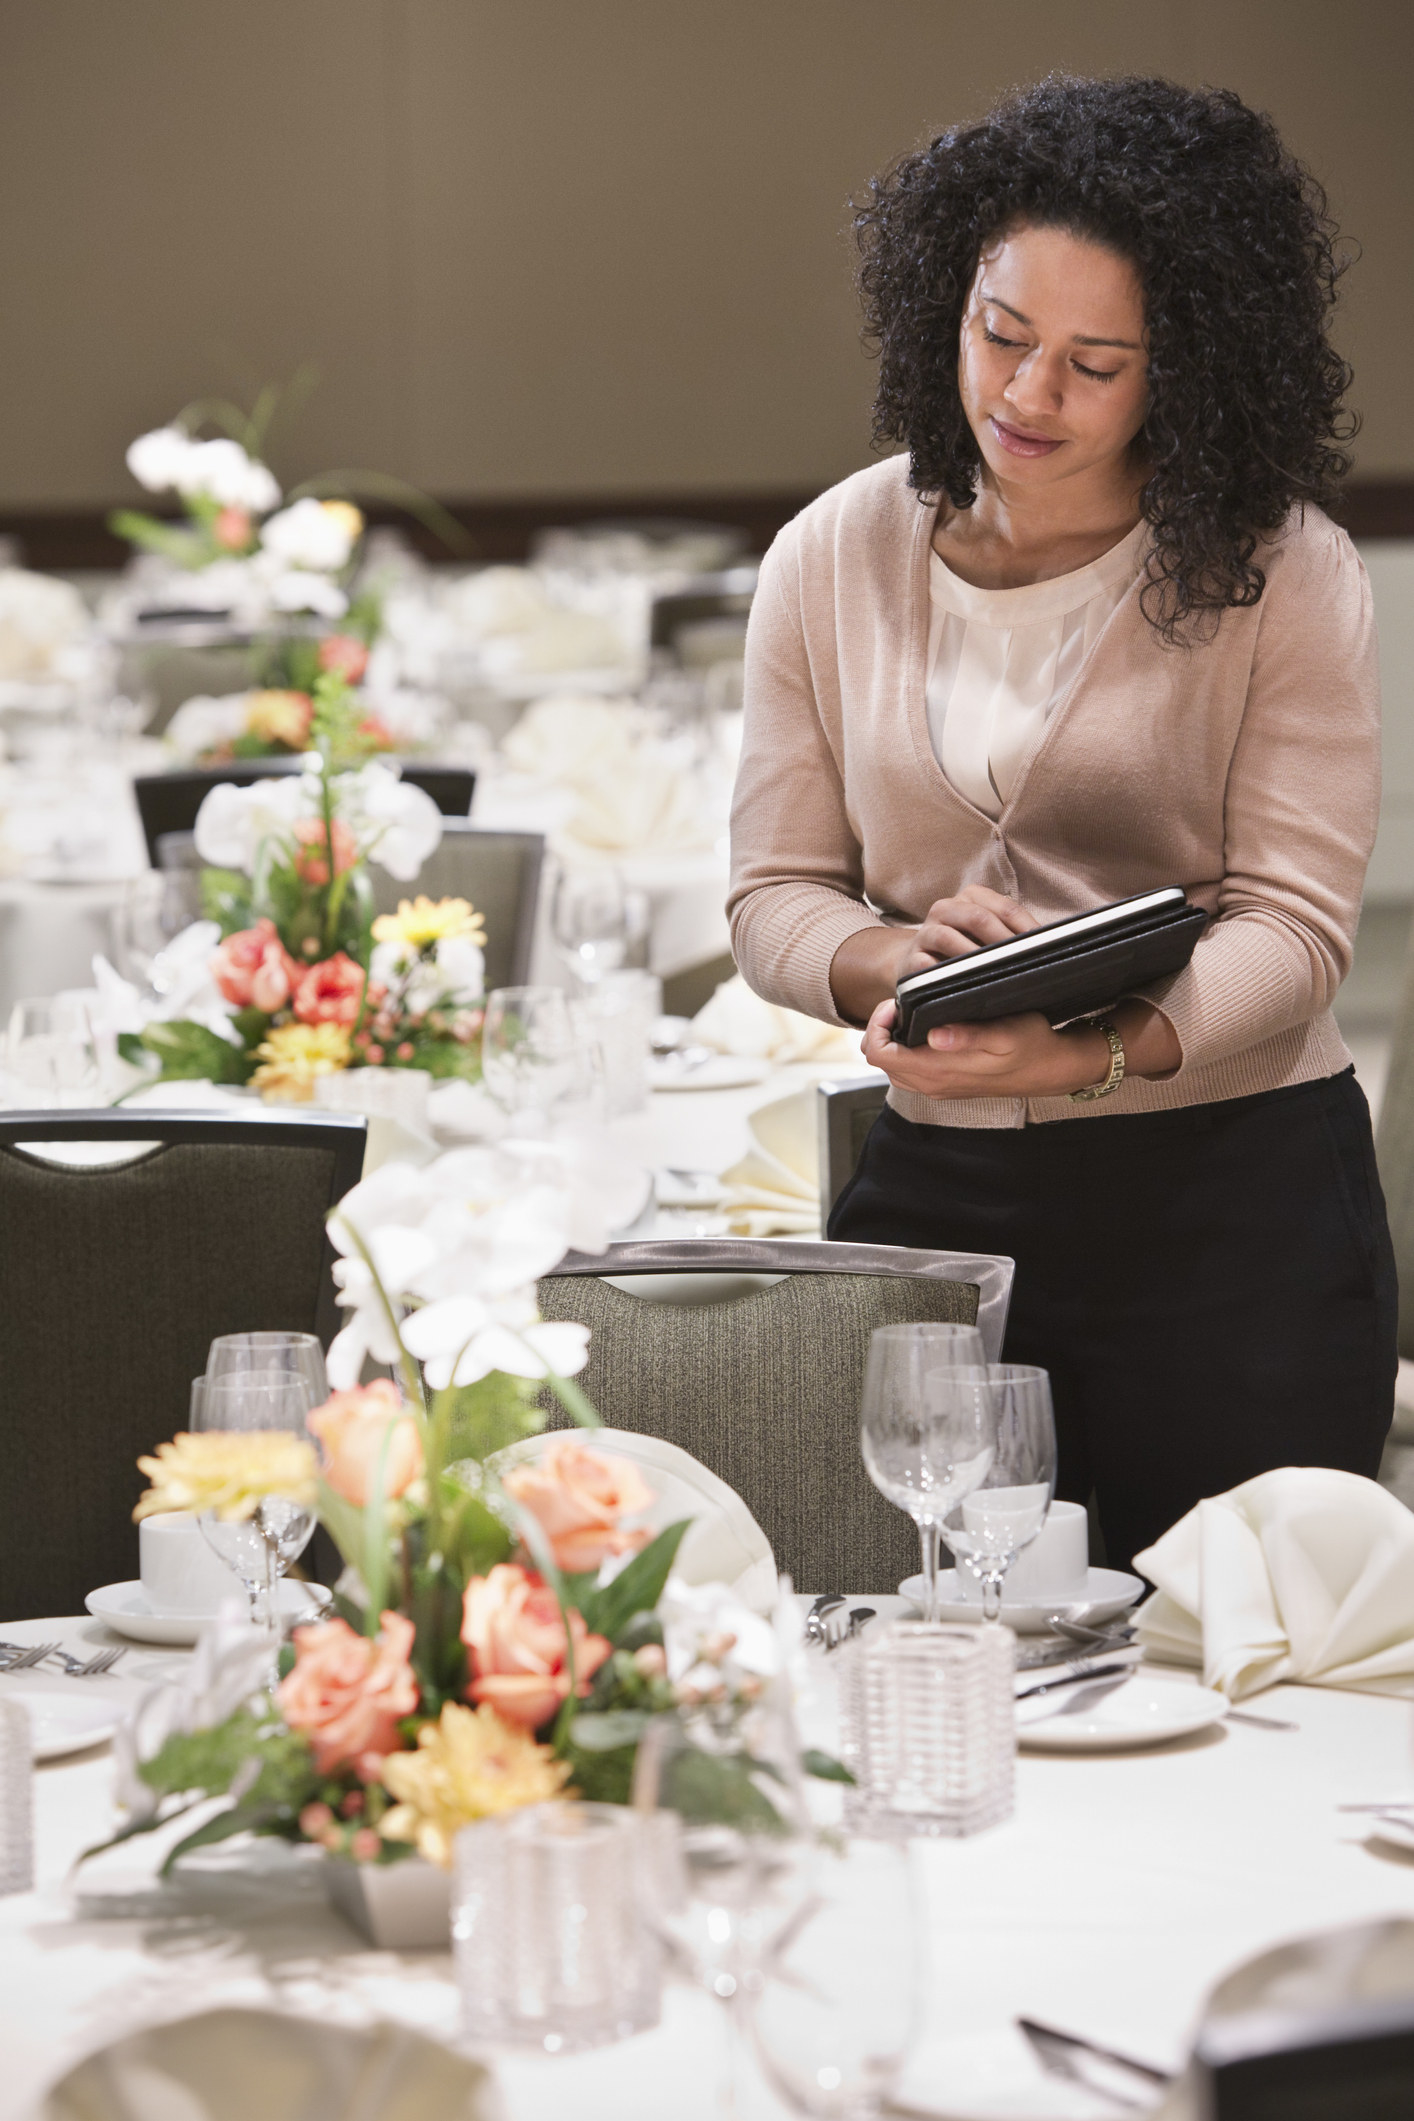 An event planner surveying the wedding decor